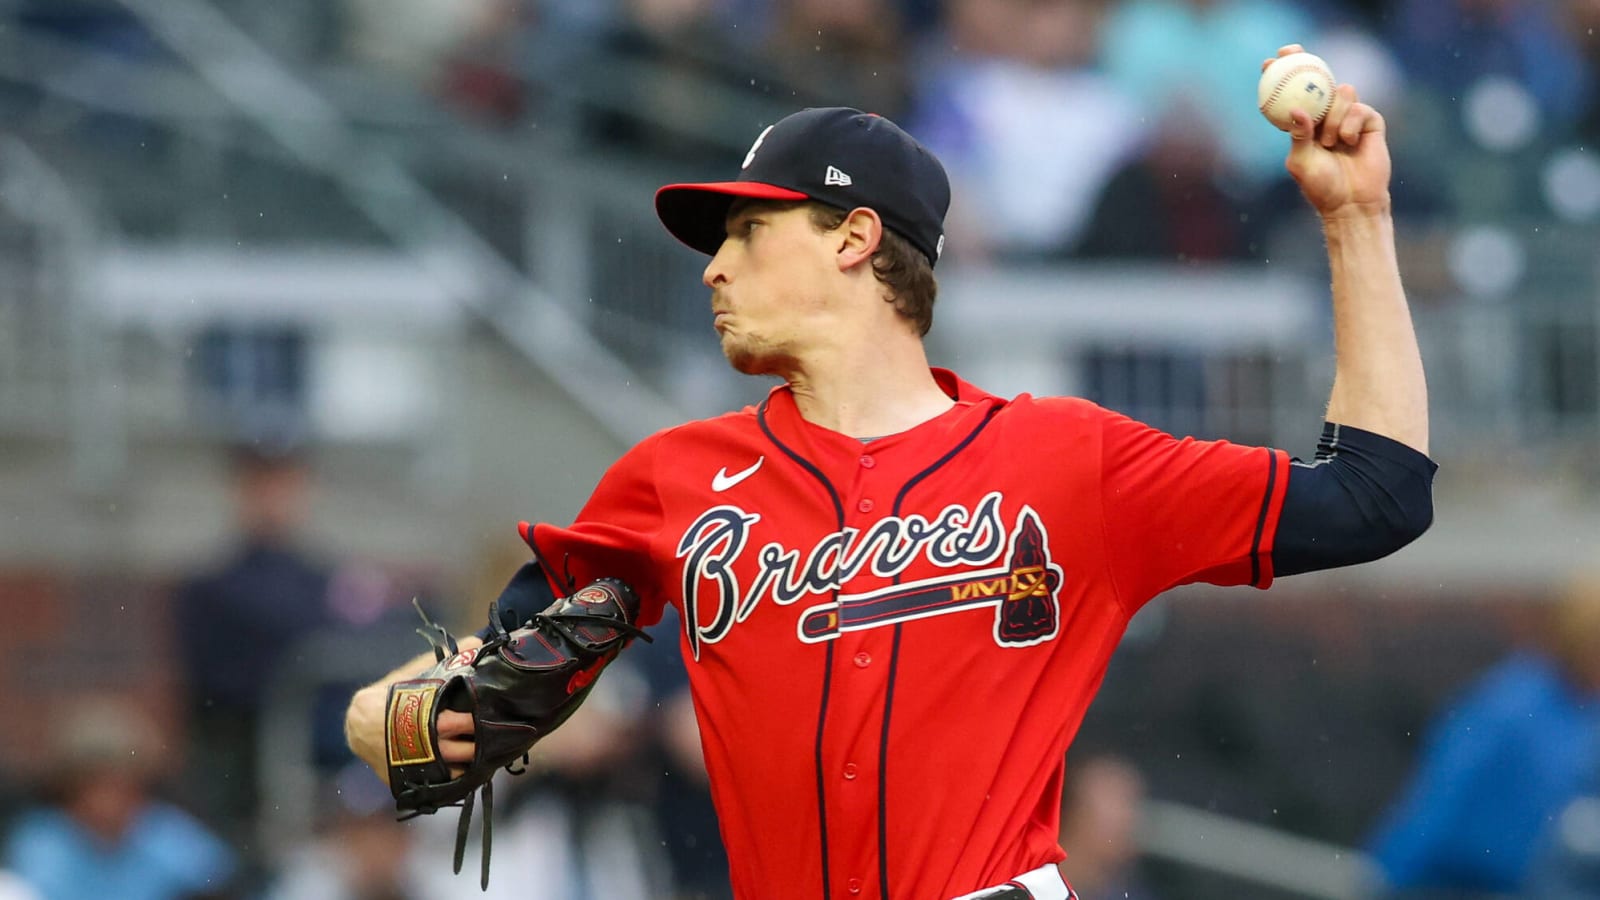  Max Fried comments on his injury